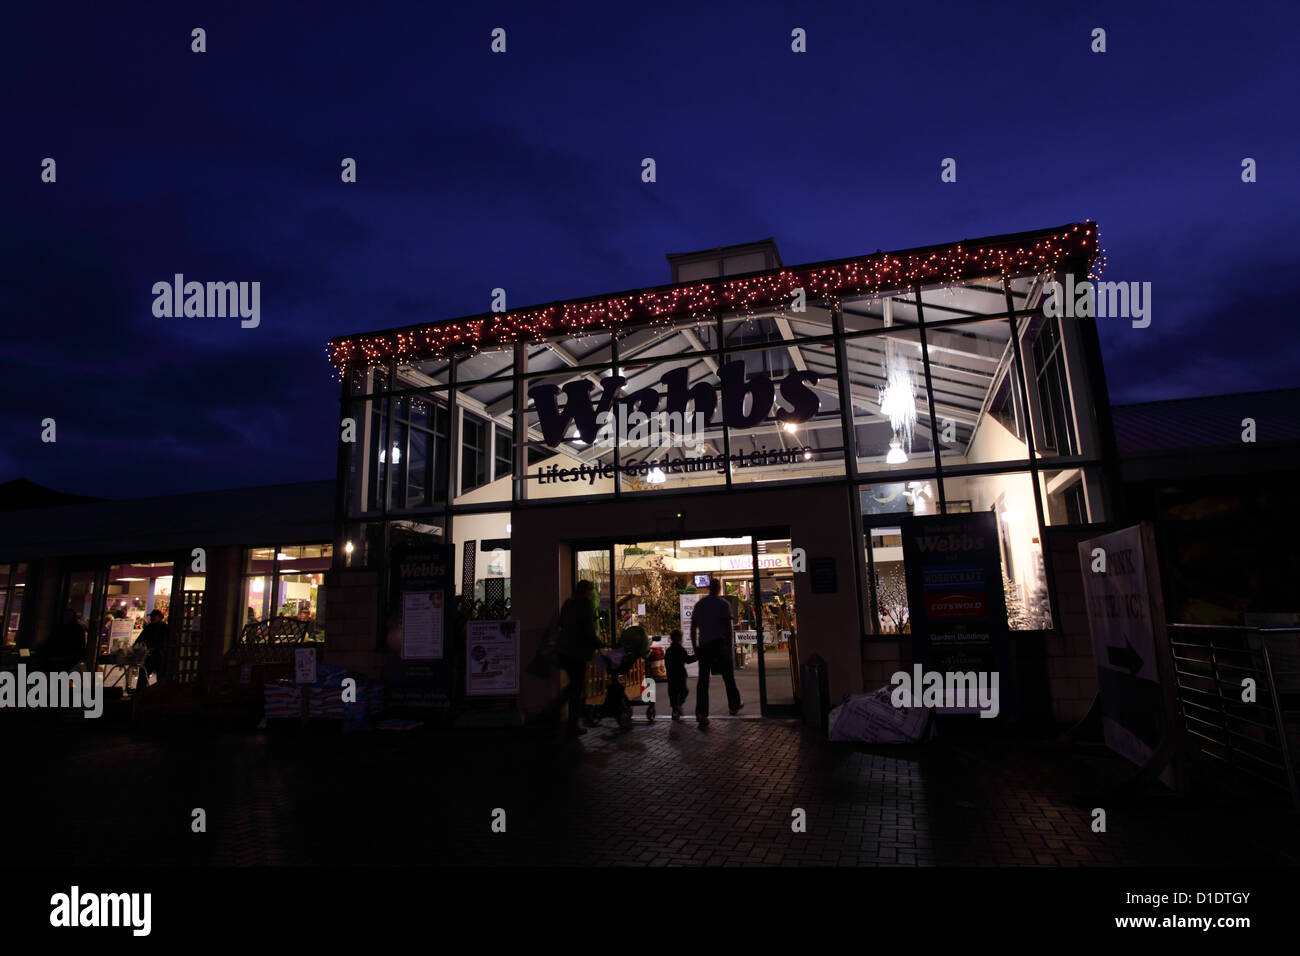 Webbs Garden Centre, Droitwich Worcs UK during the Christmas selling period. Stock Photo